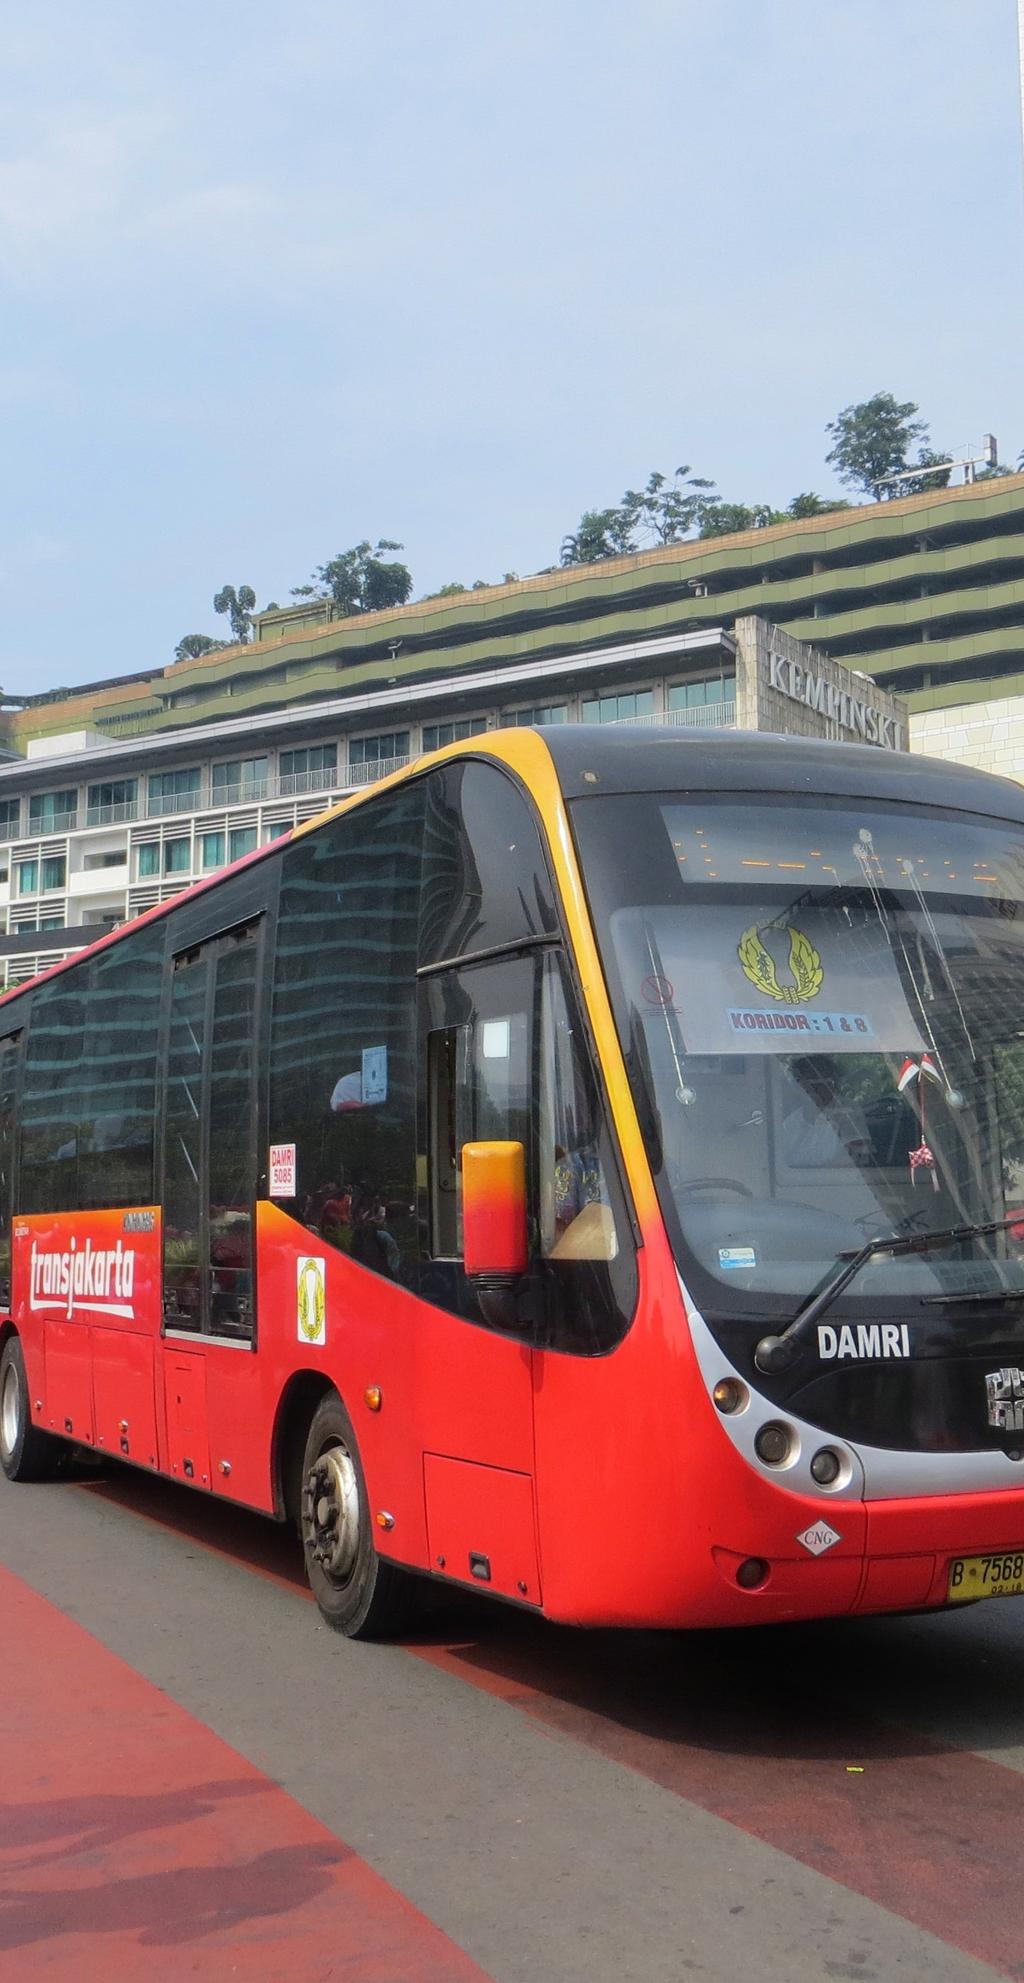 REDUCED MAINTENANCE COSTS AND EXTENDED OIL DRAIN INTERVALS SAVES INDONESIAN TRANSPORT COMPANY USD $42,667 8 The Challenge Indonesian bus and coach company Hino Bus operates a fleet of vehicles that